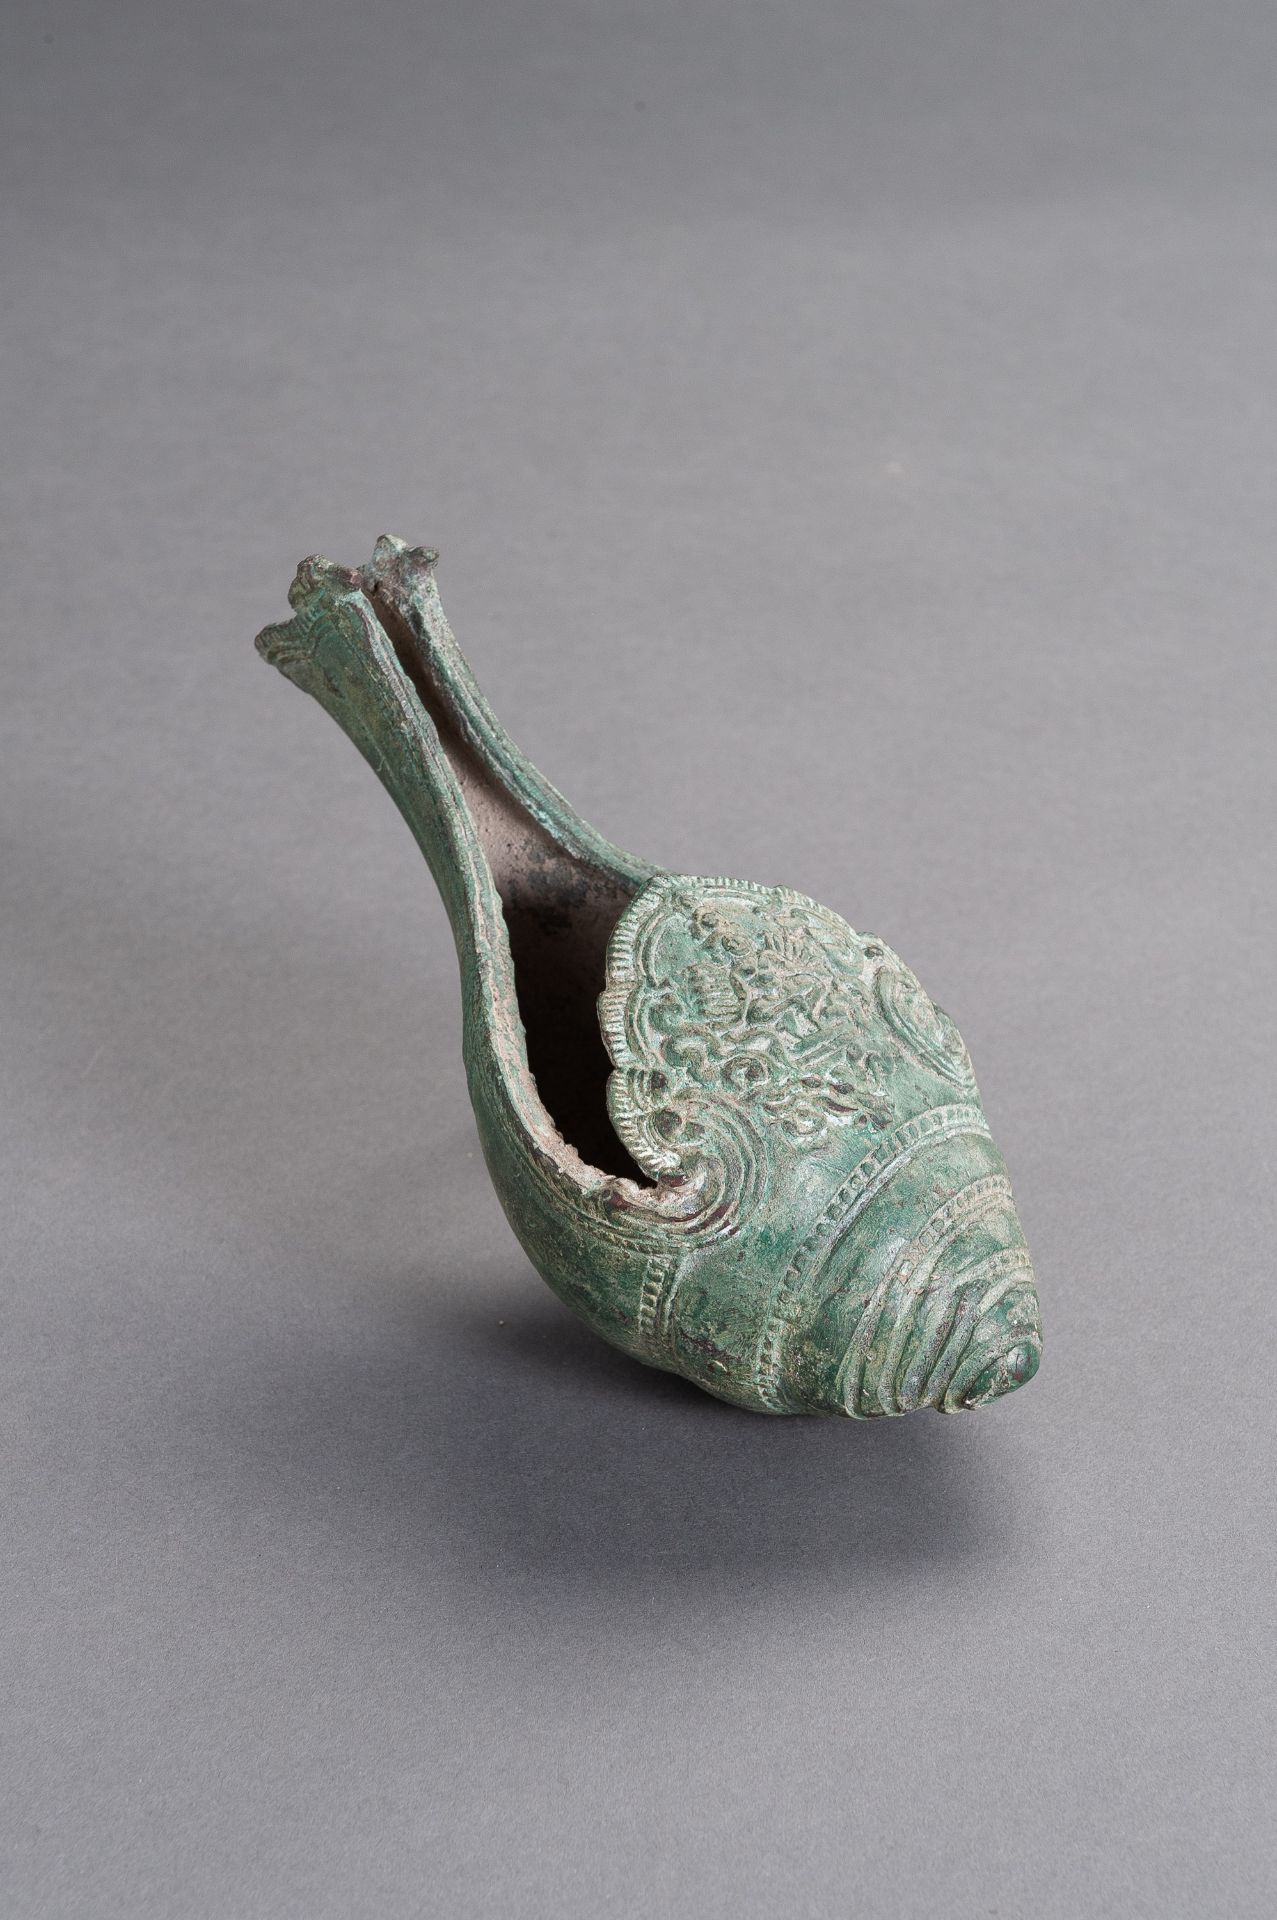 A BRONZE KHMER CONCH SHELL - Image 2 of 12